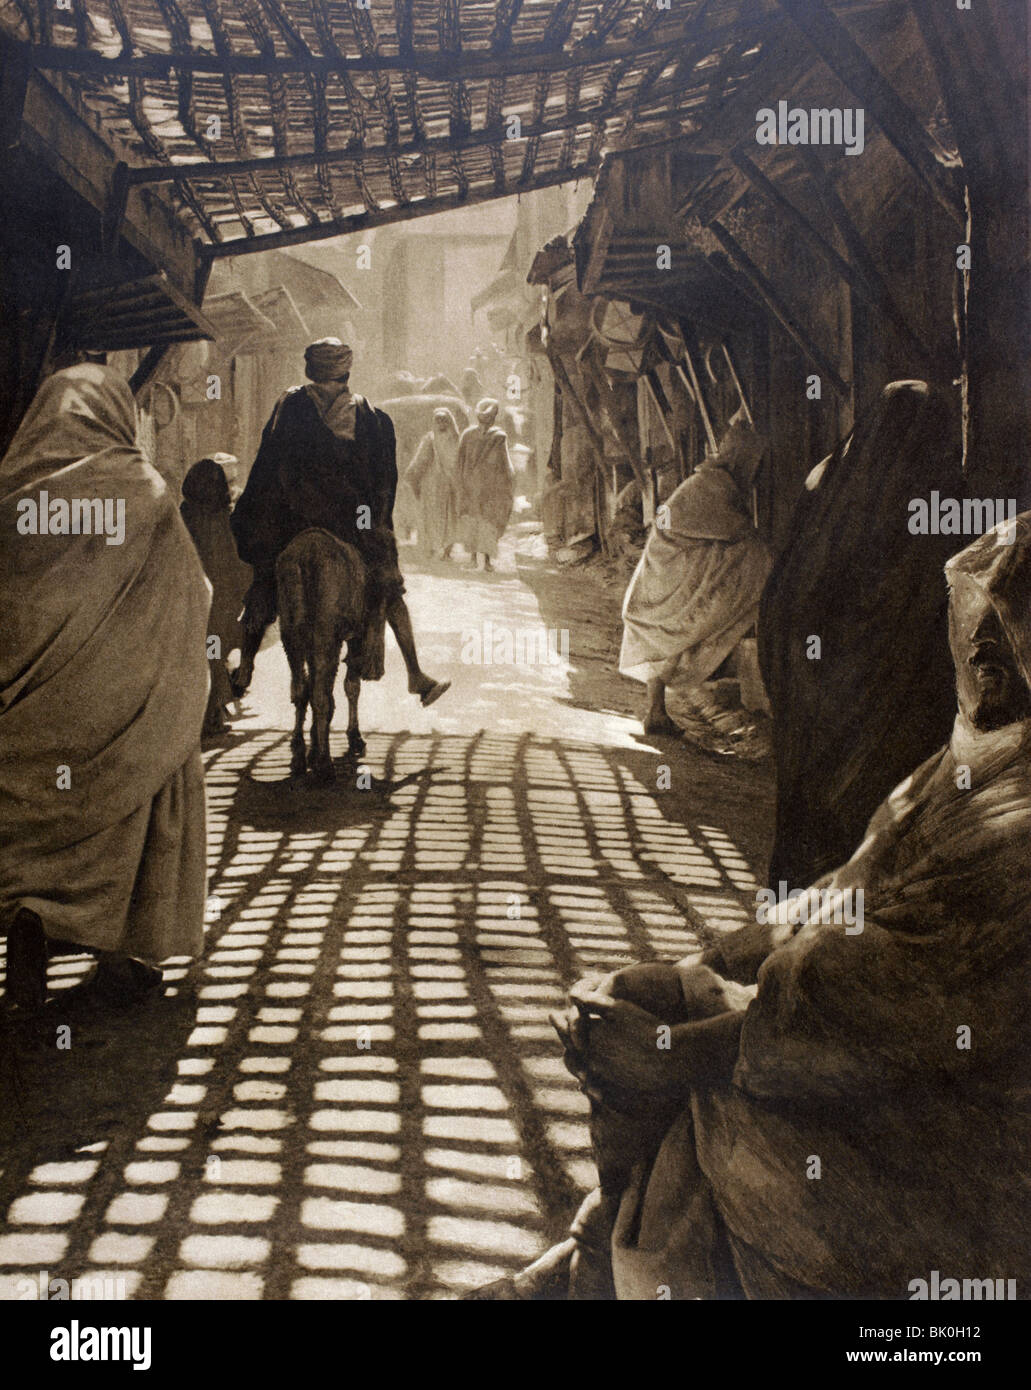 In a Moroccan market place, or medina, in the early 20th century. Stock Photo